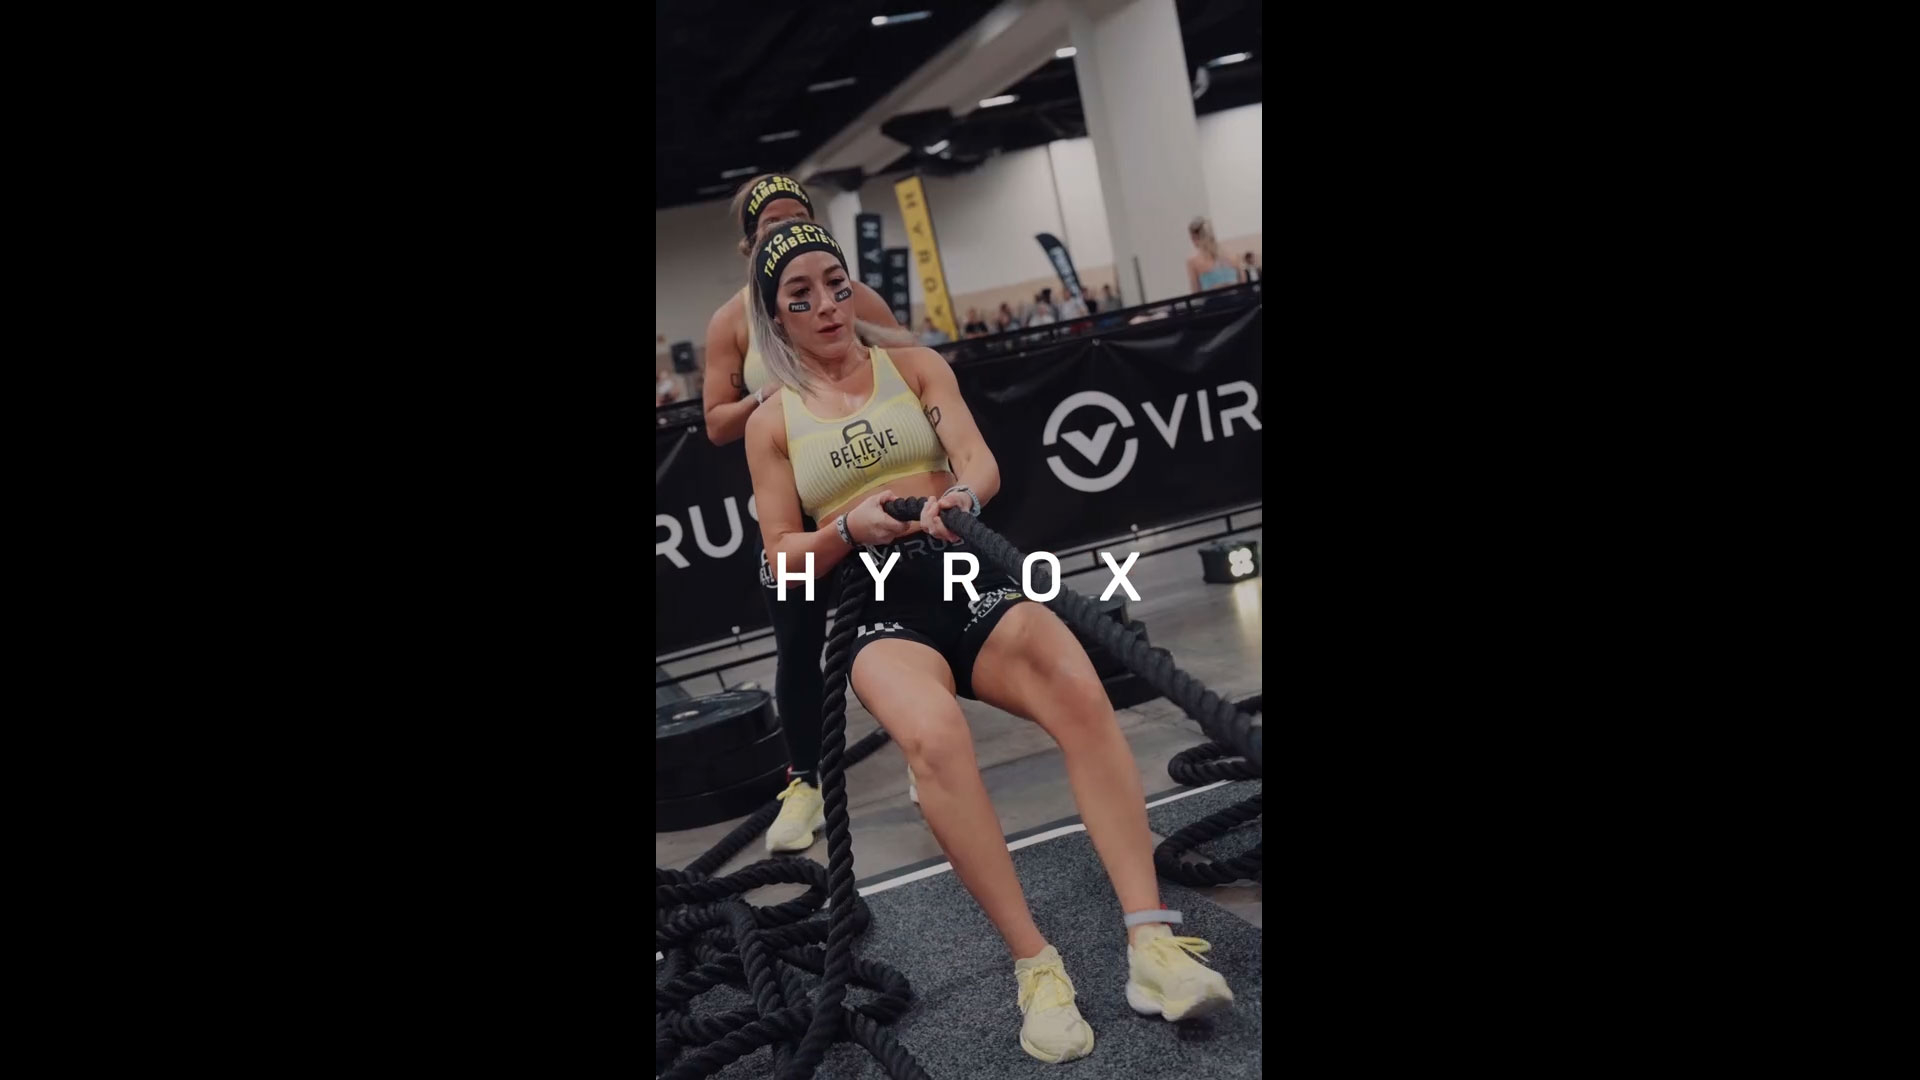 Centr enters competitive fitness space as official equipment provider of HYROX.